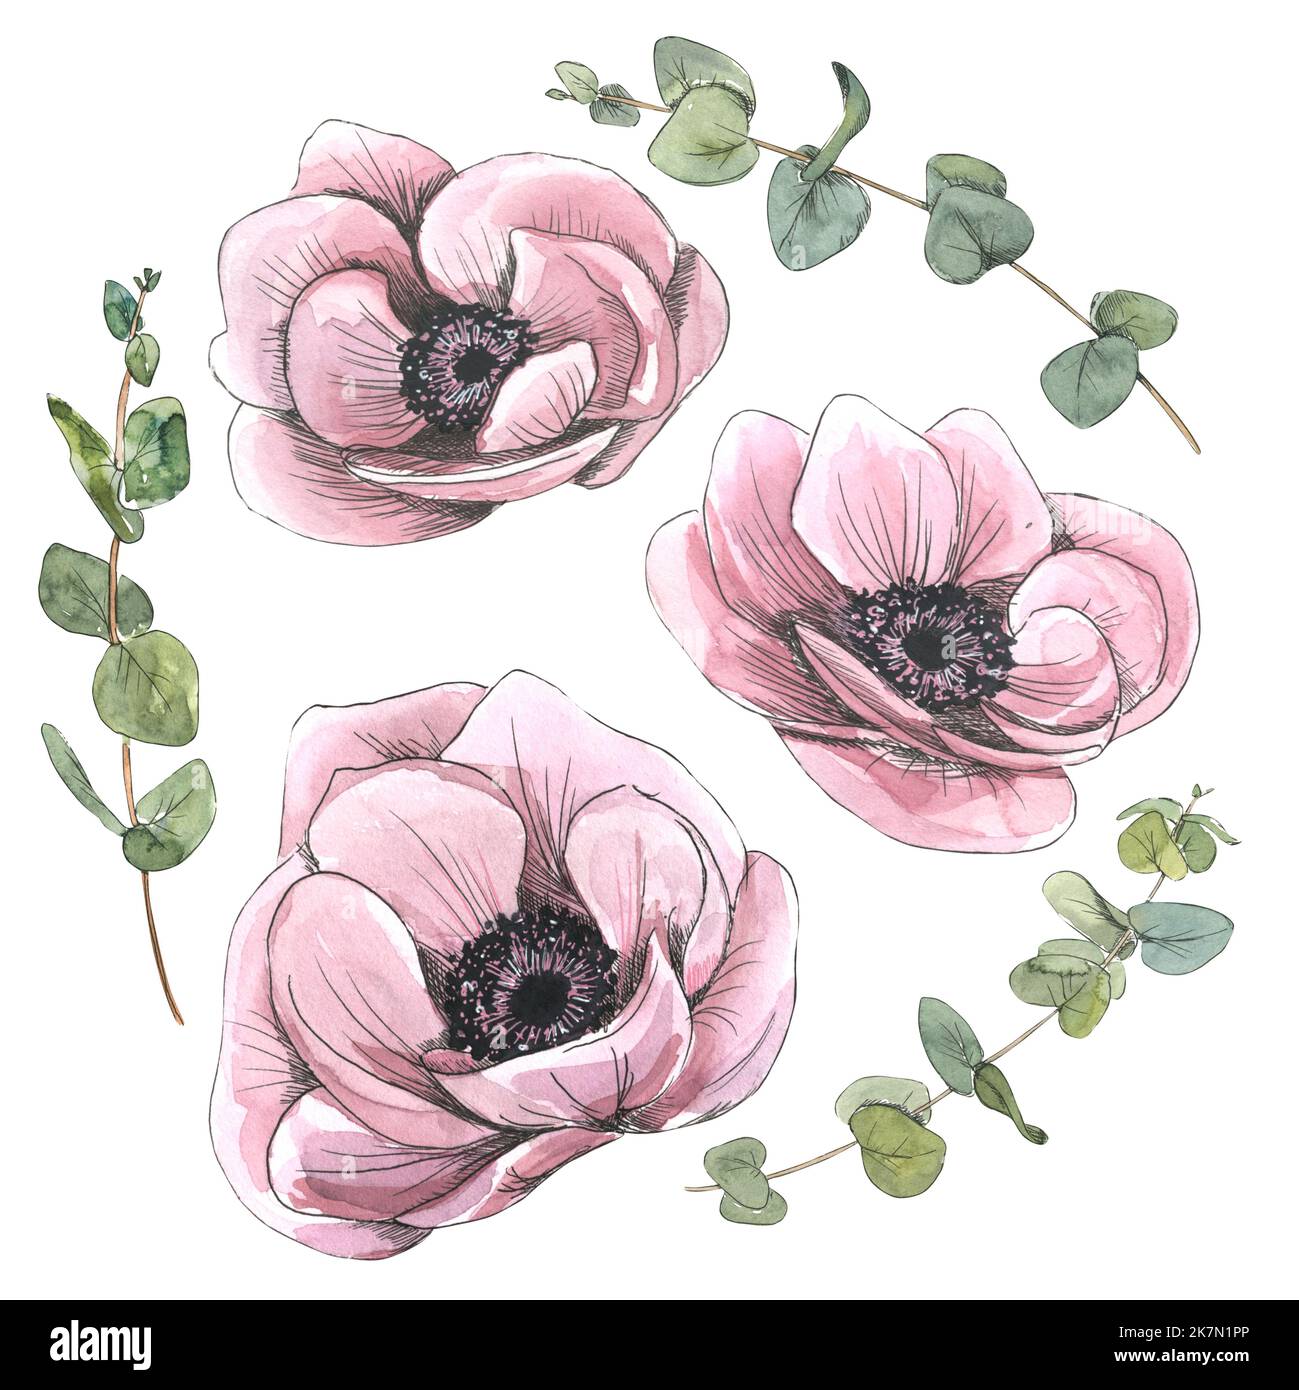 Flower buds of pink anemones with eucalyptus flowers. Watercolor illustration in sketch style with graphic elements. Isolated objects from the PARIS Stock Photo